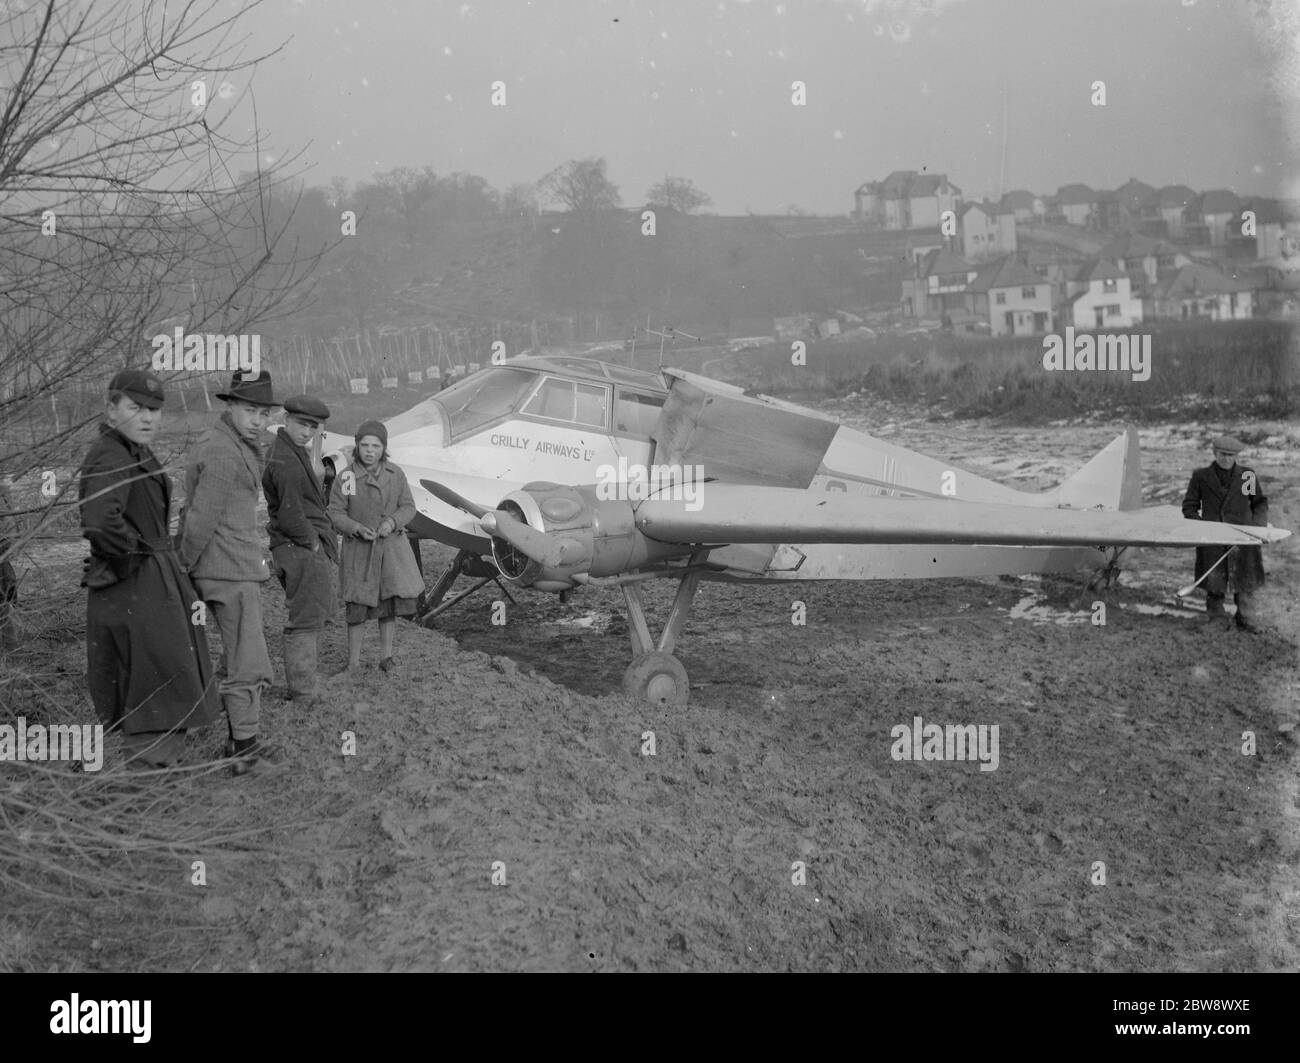 A Crilly Airways Ltd , aereo a due motore giù per incidente a St Mary Cray , Kent . 1936 Foto Stock